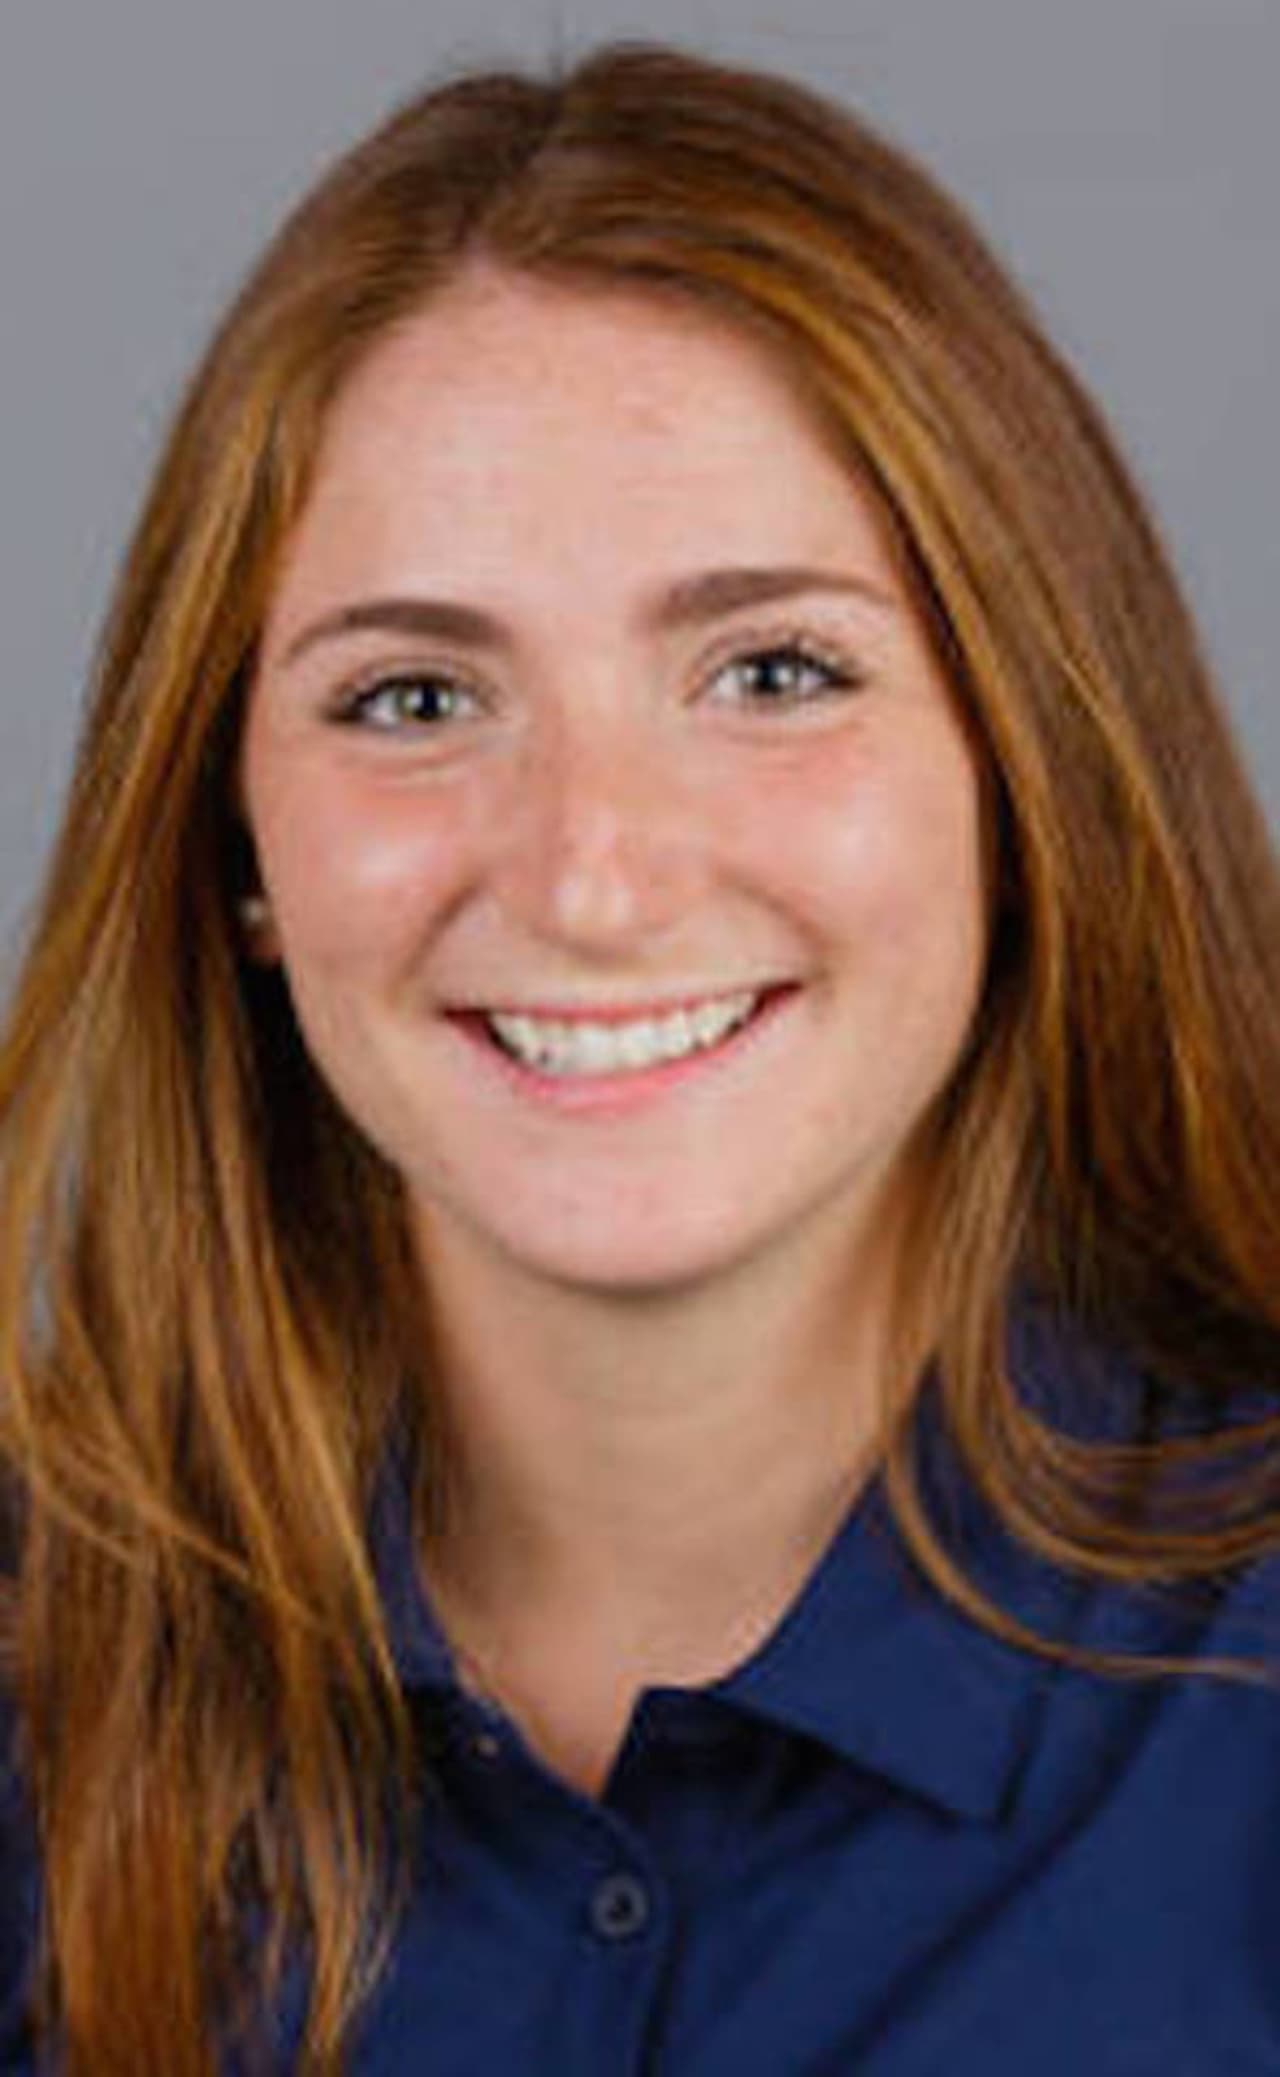 Sarah Schwartz of Weston rowed for the University of California as it won the national championship last weekend.